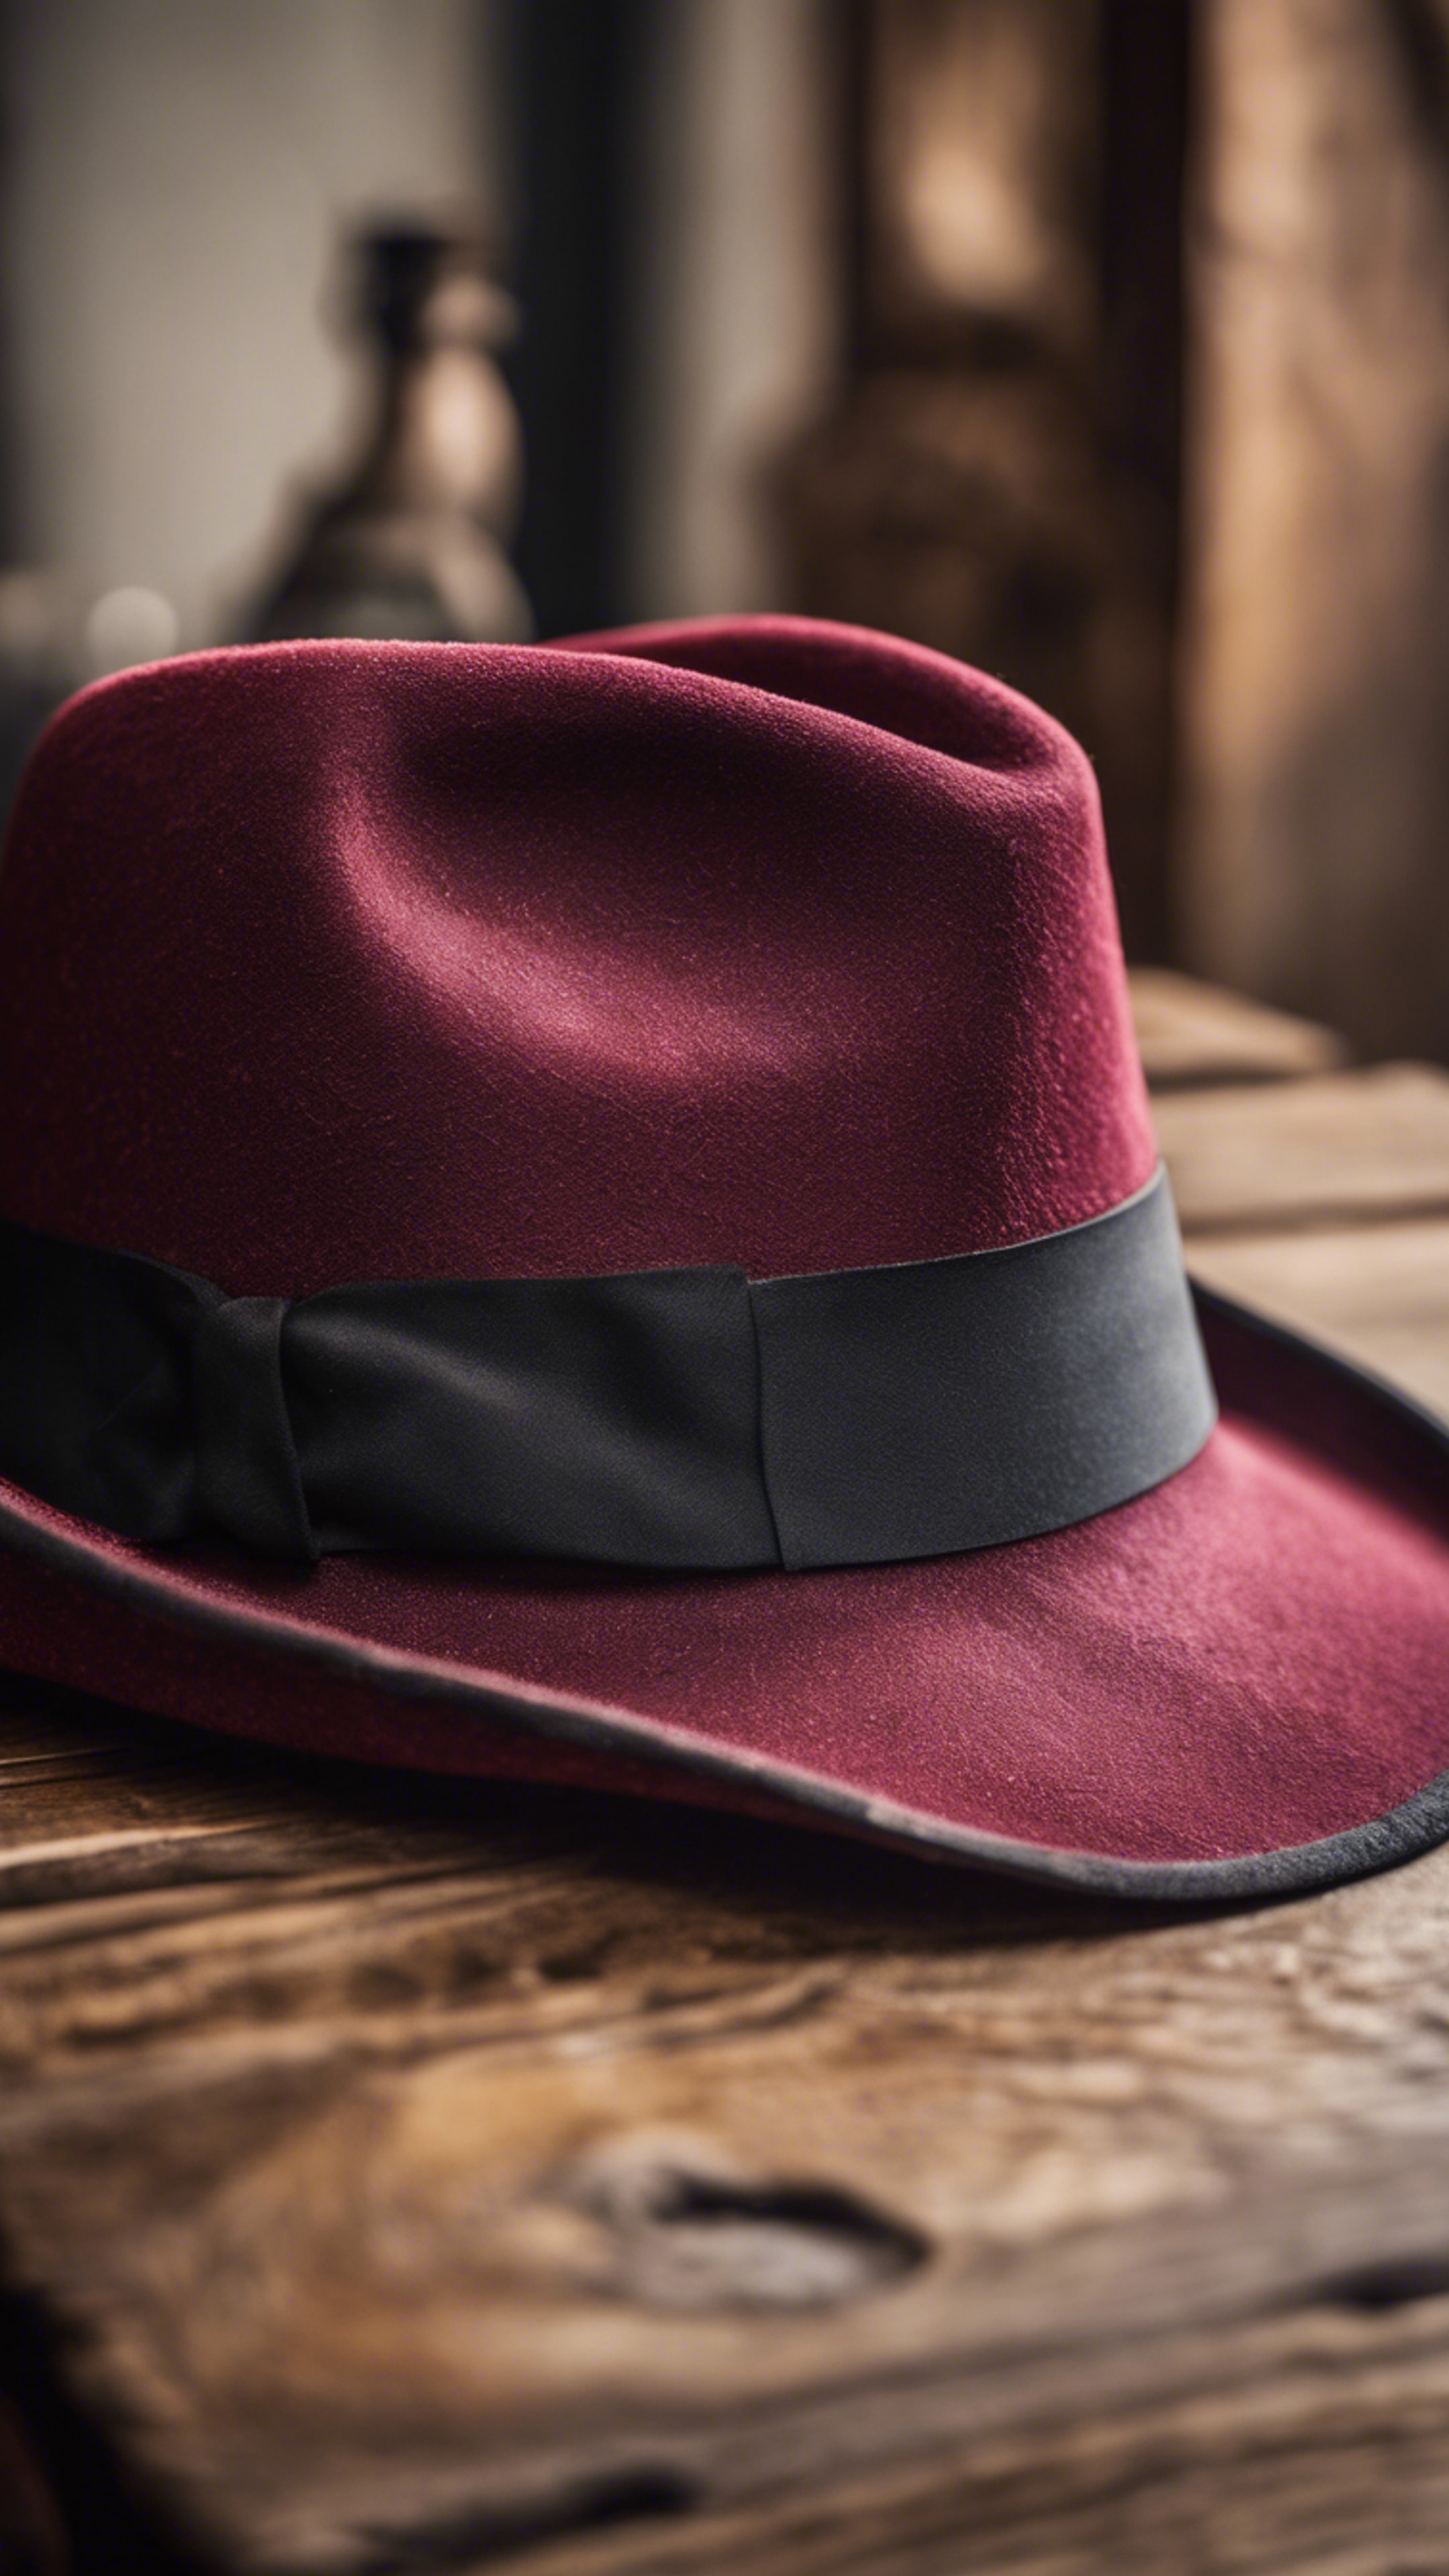 A cool maroon fedora hat positioned on an antique wooden table. Tapetai[05b3f475f93c4ade83cc]